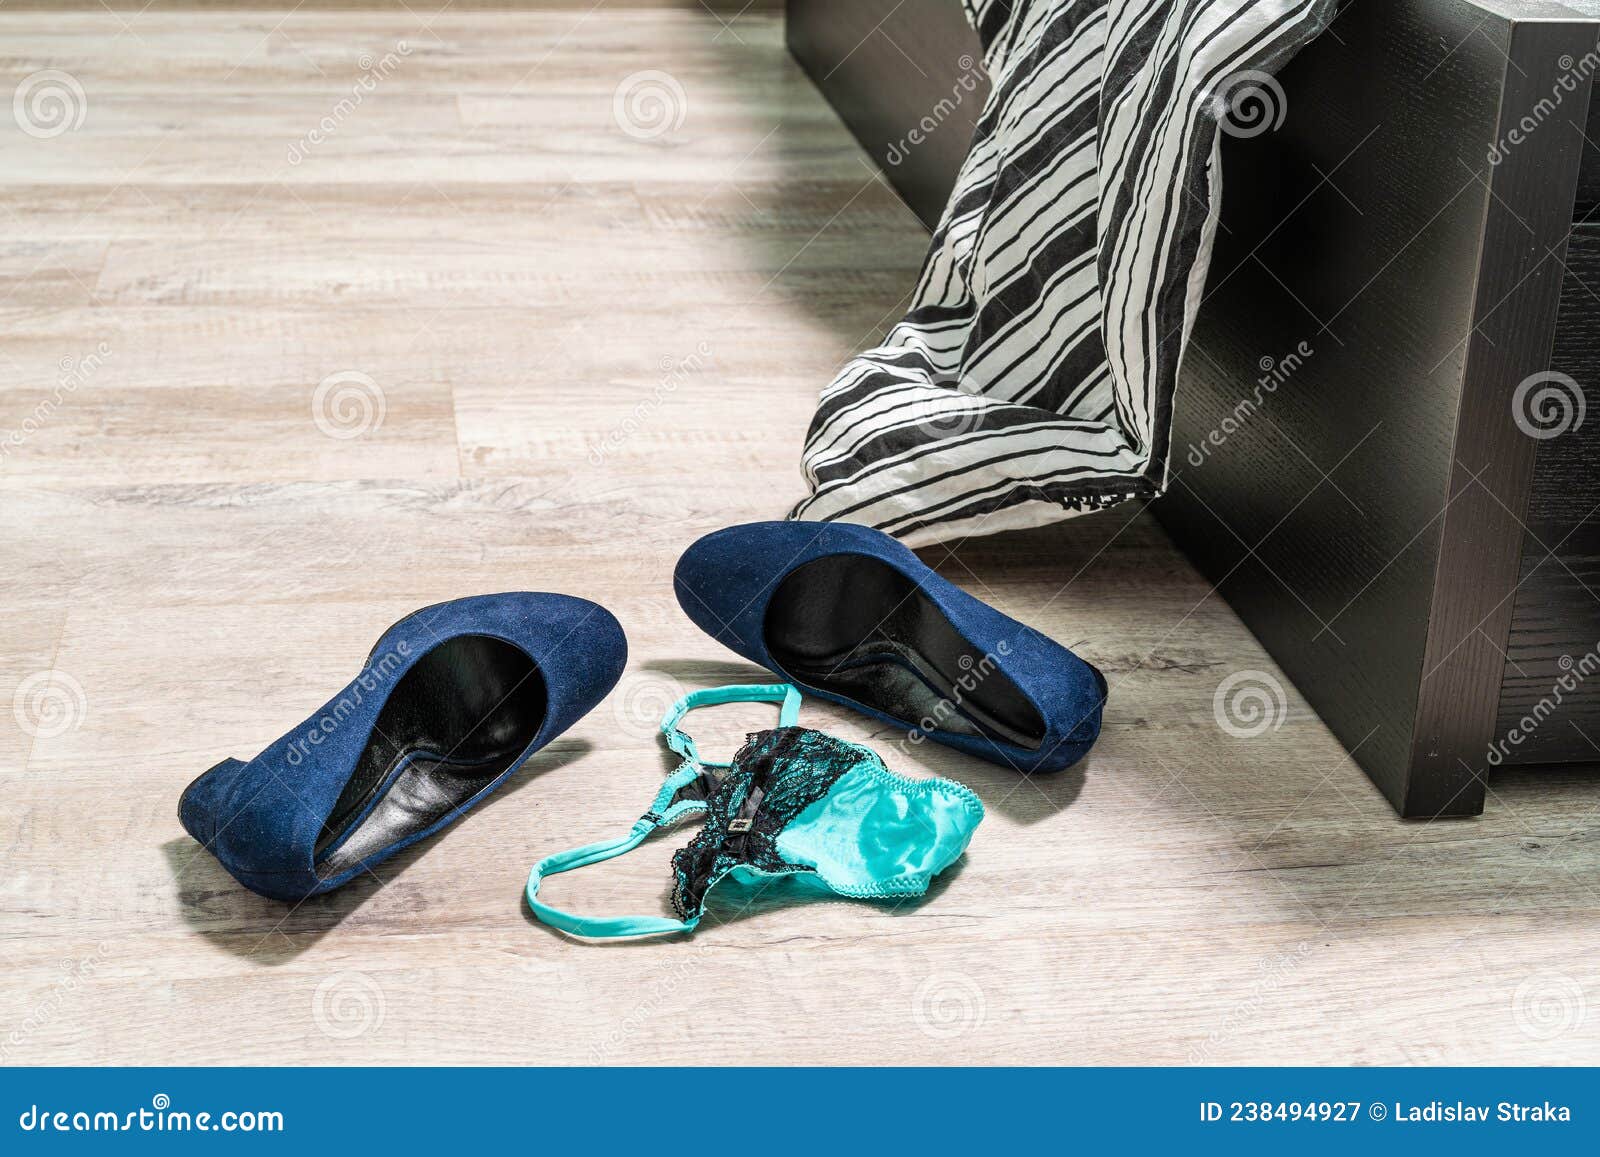 Blue High-heeled Shoes, Green-black Lace Thong Panties and a Condom on the Wooden Floor by the Bed Stock Image image